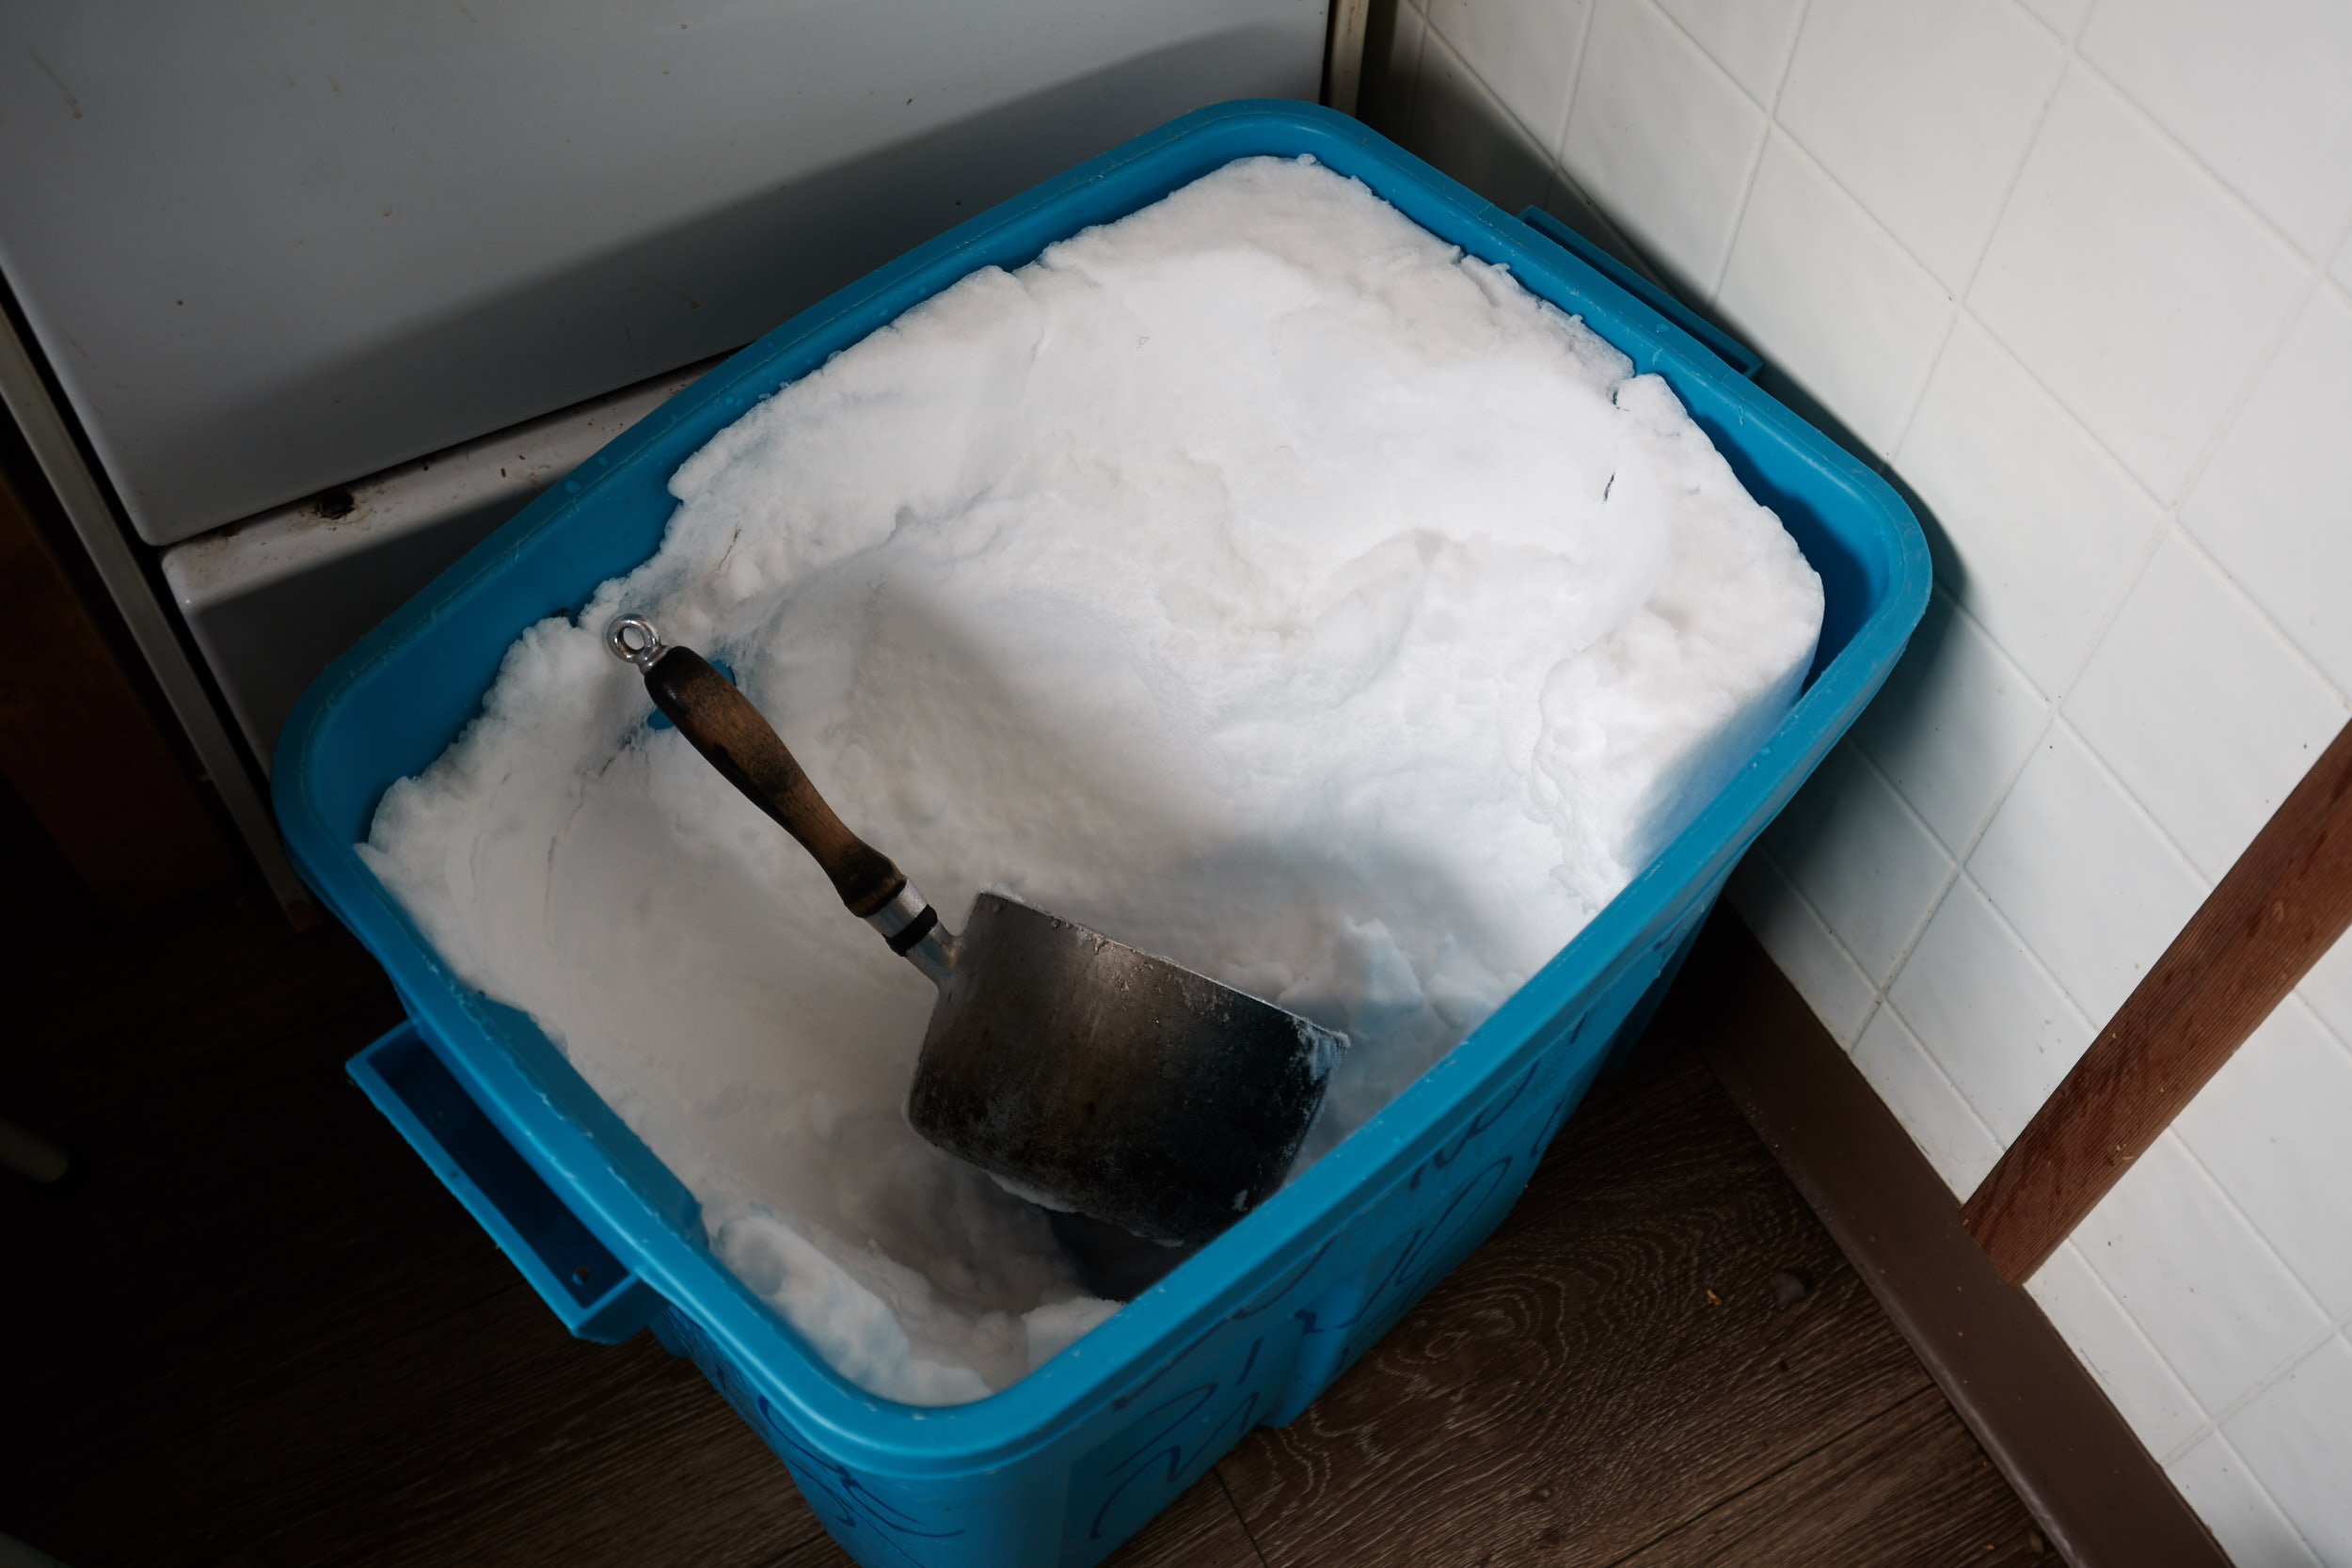  A few times a day we would fill 3 of these large tupperwares with snow to then later melt for drinking water. 